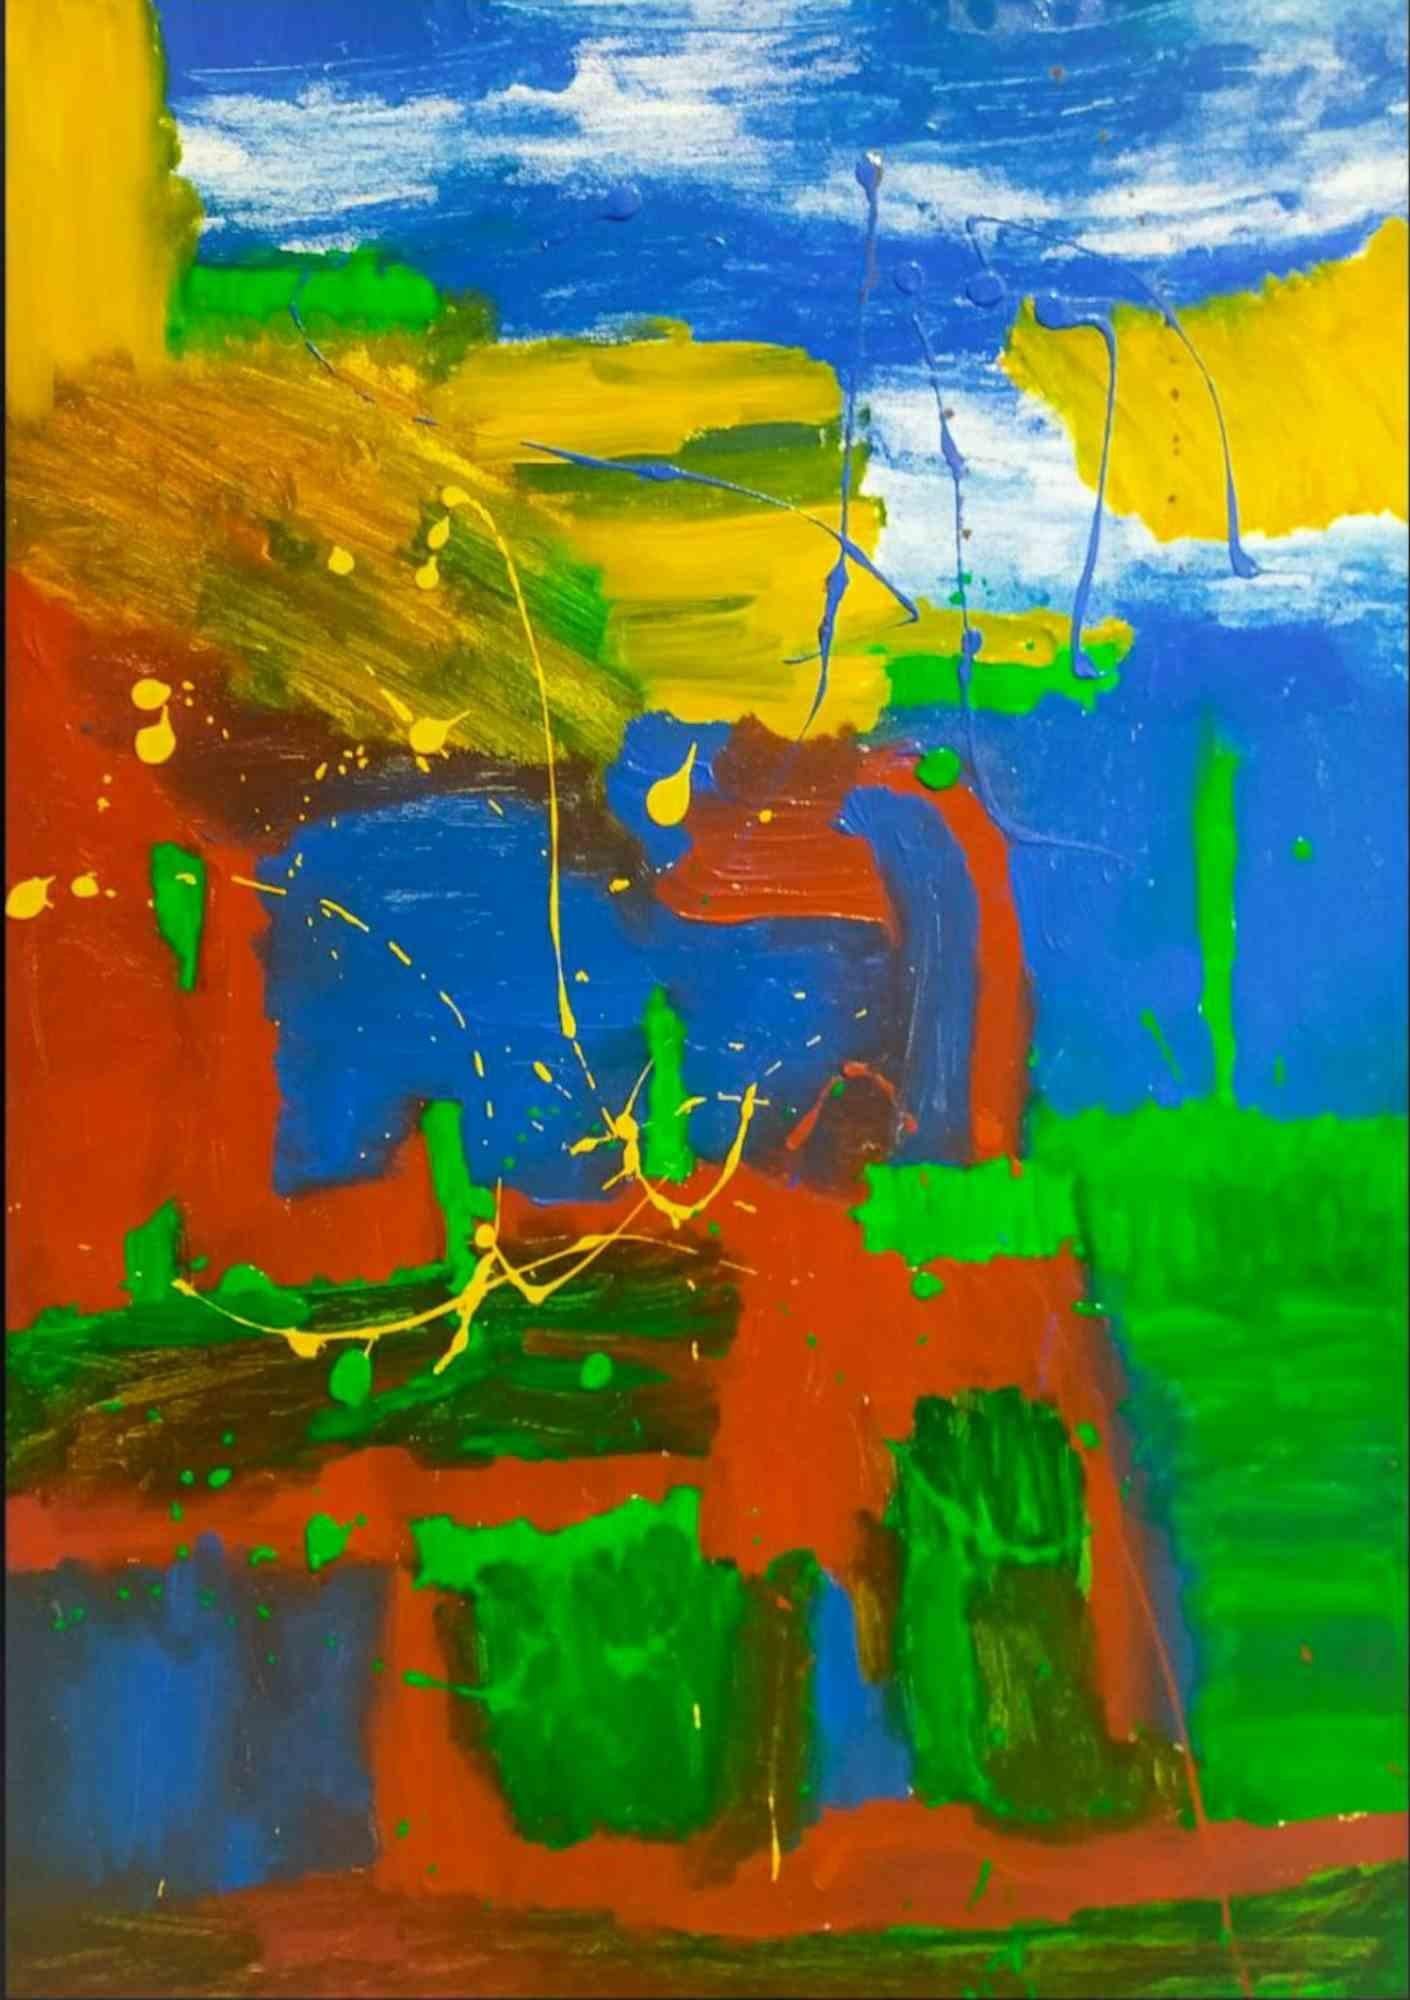 Landscape - Acrylic on Canvas by Laura Placa - 2021